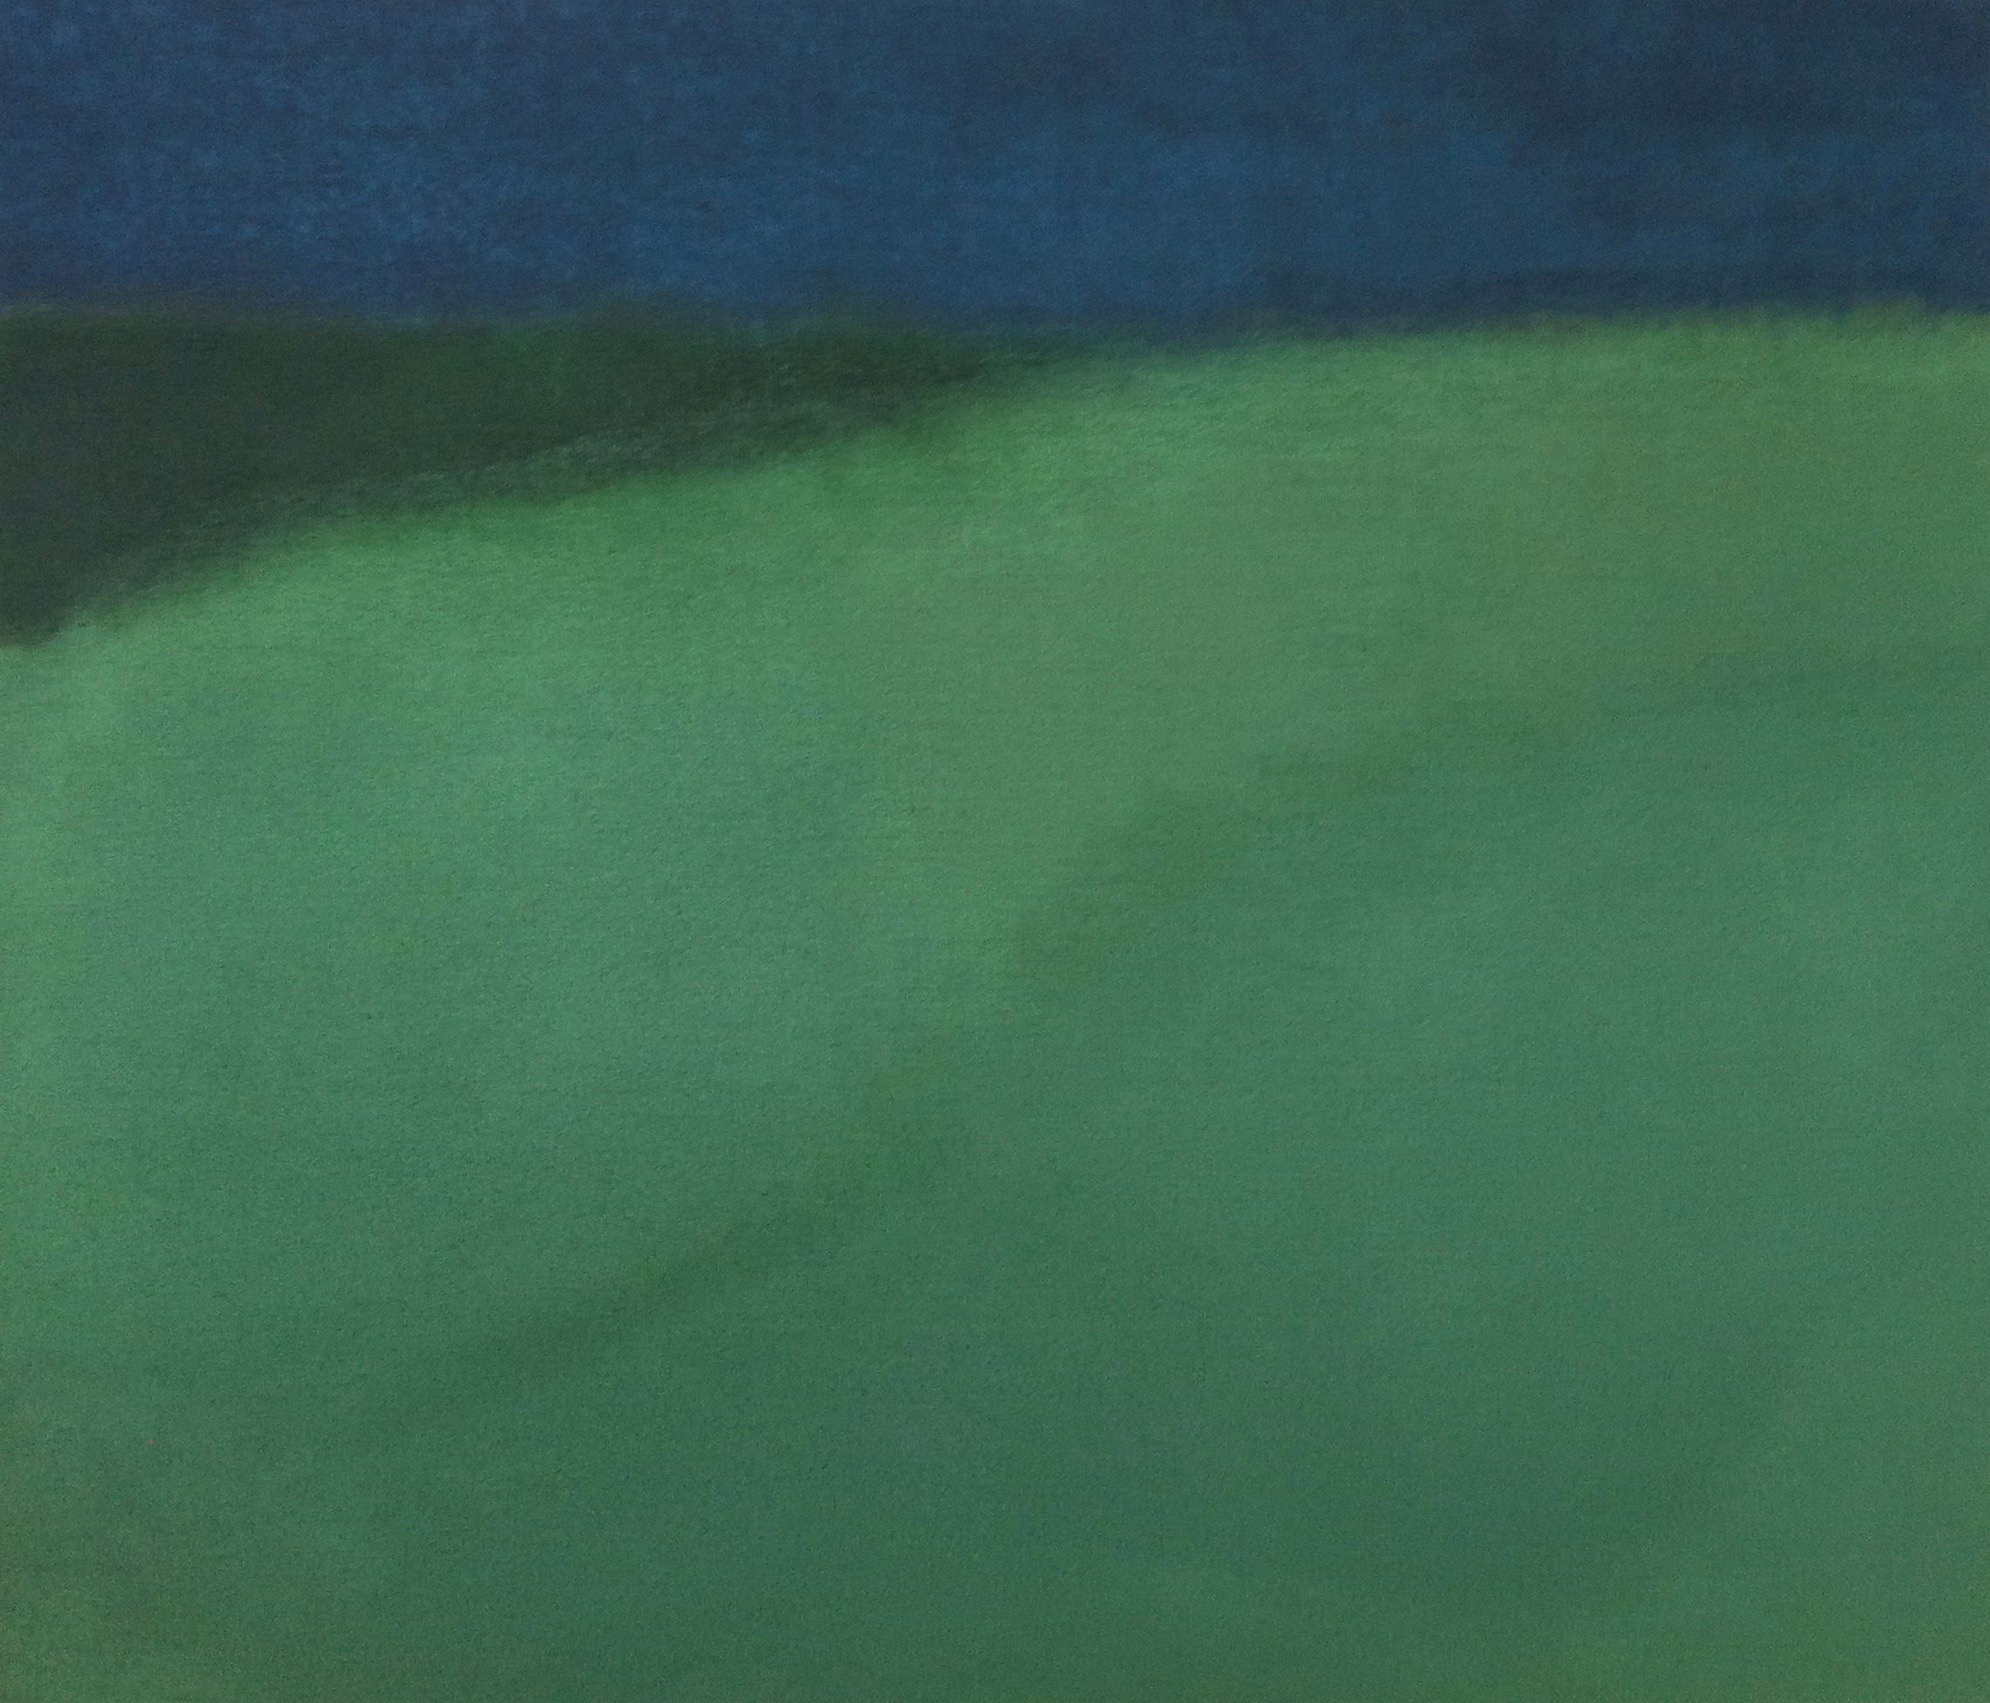  Untitled (Green Nocturne), 2013. Oil on Linen, 41 x 47 inches. Private Collection. 